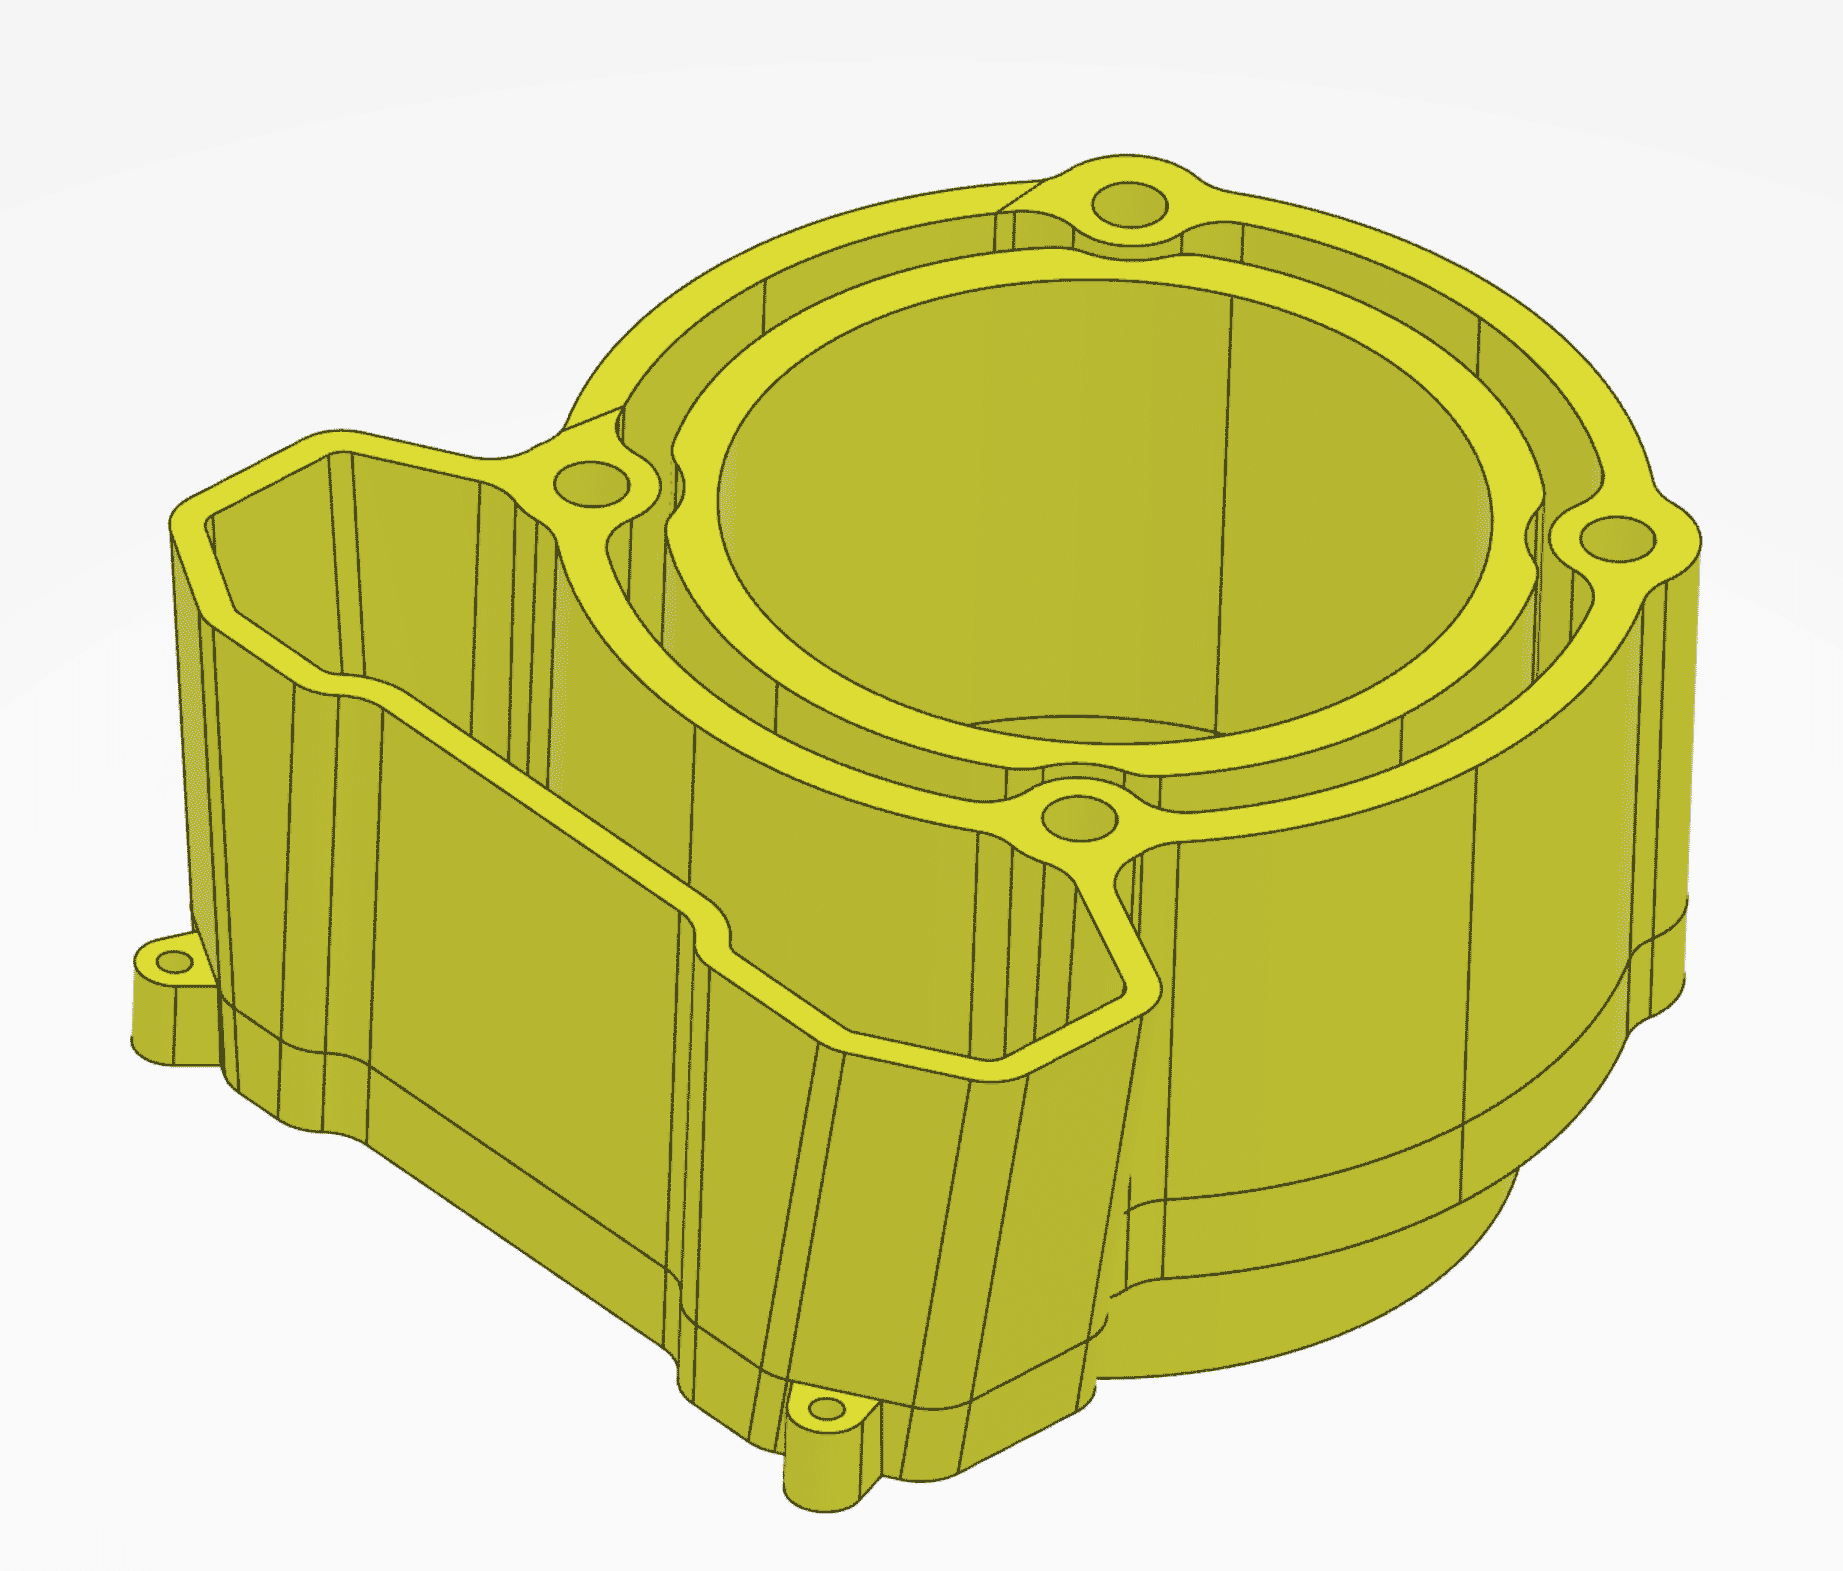 When a component is fully mesh-able in 3DEXPERIENCE Simulation, the whole thing will highlight yellow.